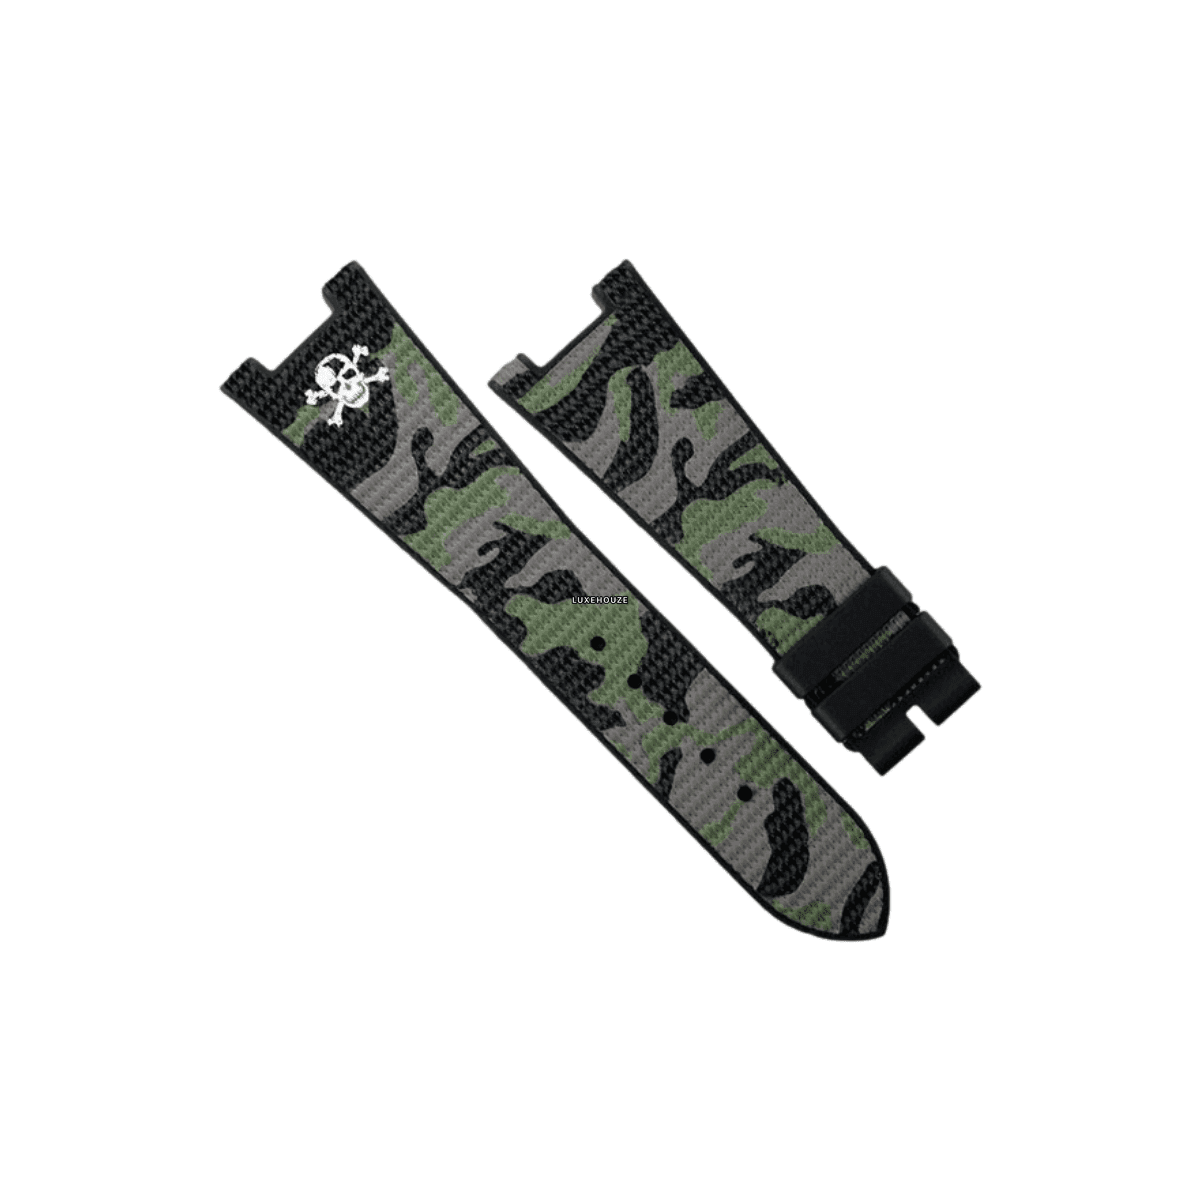 Nautilus On Strap Special Edn. Urban Camo Twill Swimskin Watch Bands RUBBER B Military Green 